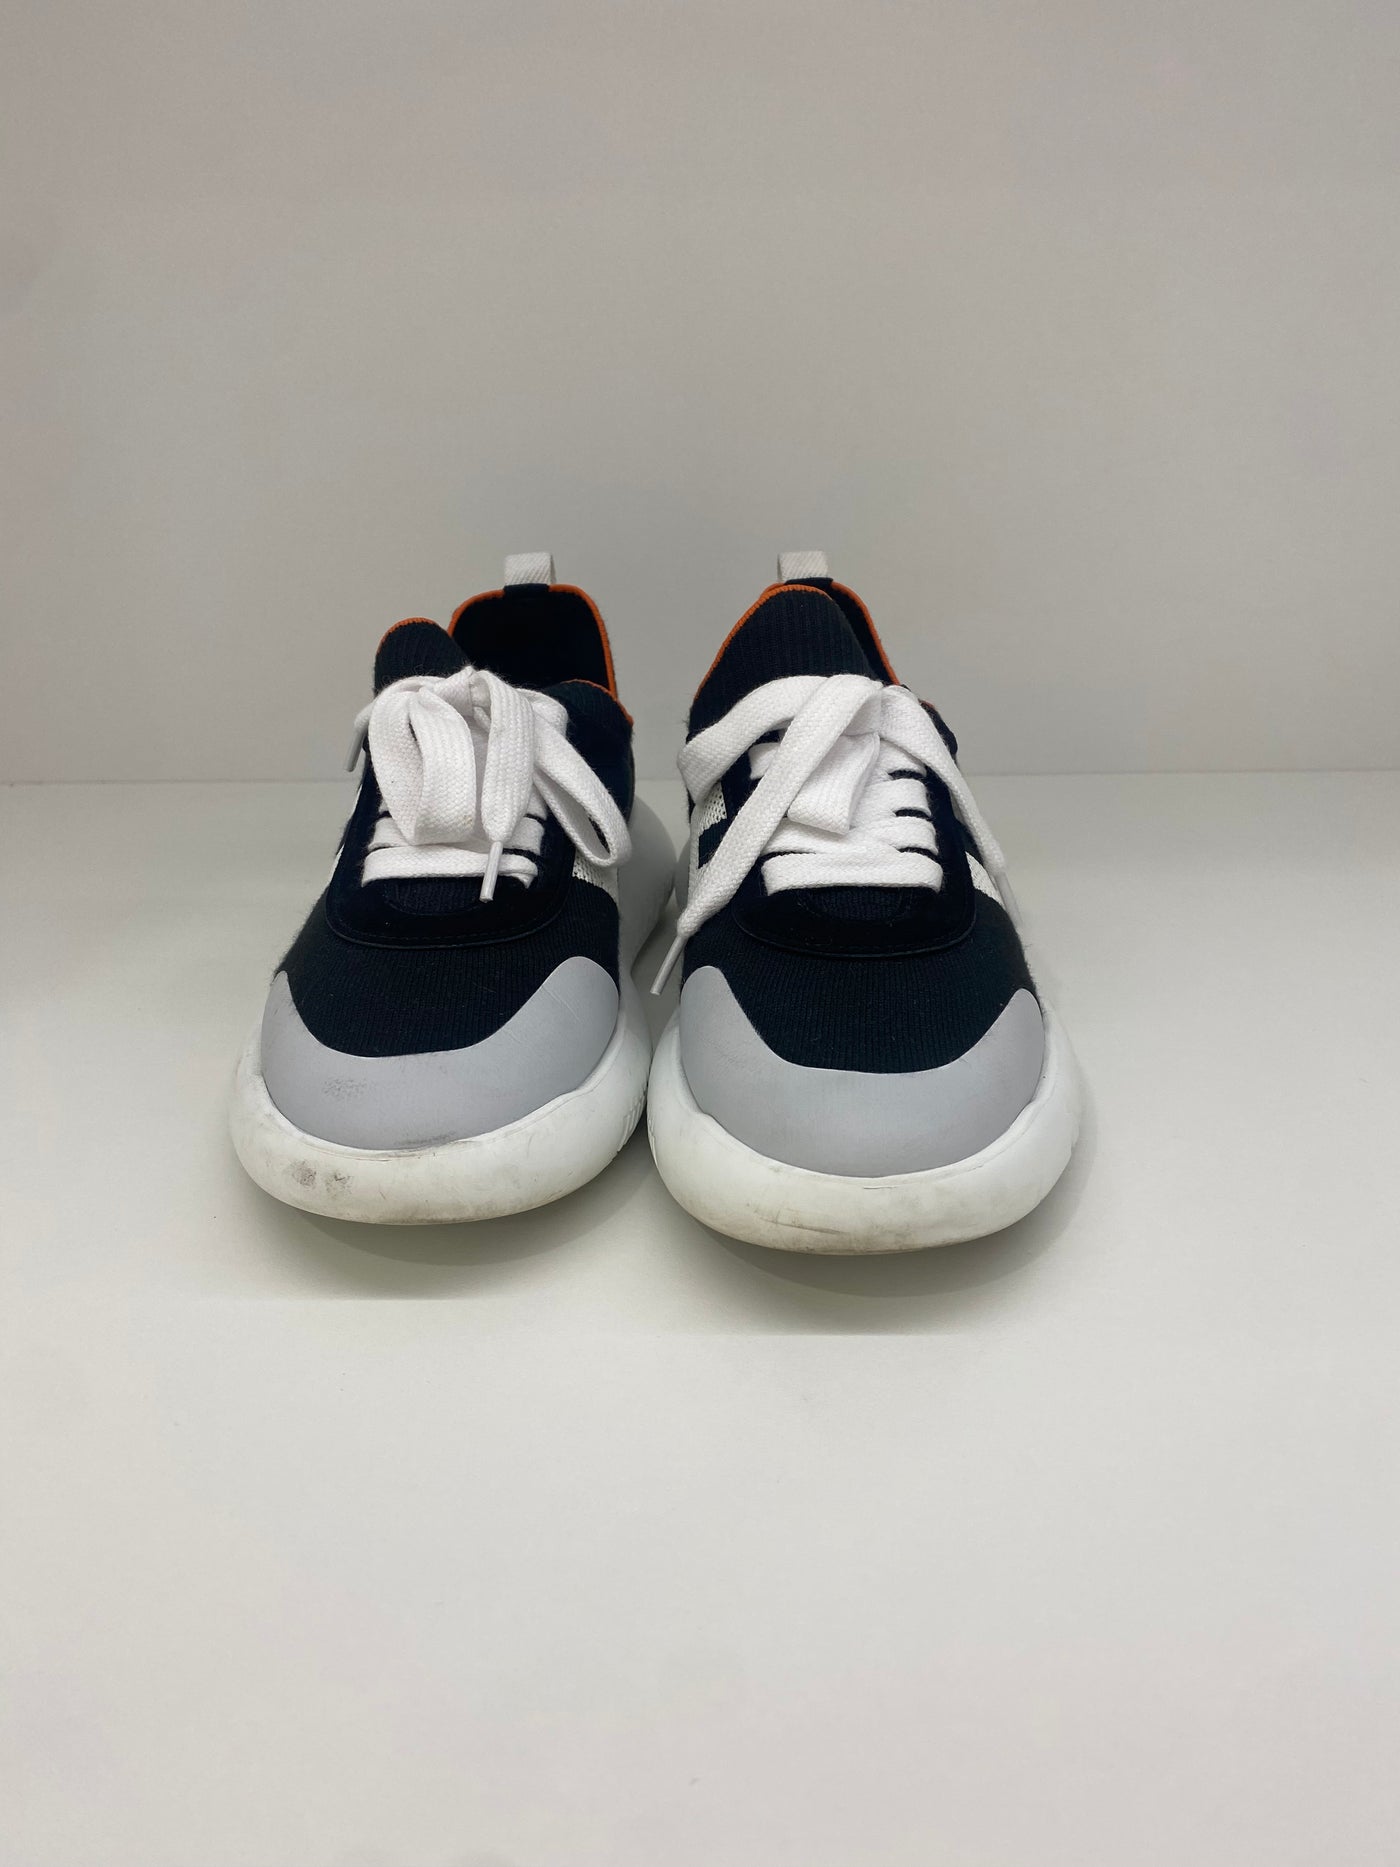 Hermes Black and White Sneakers - Size 36